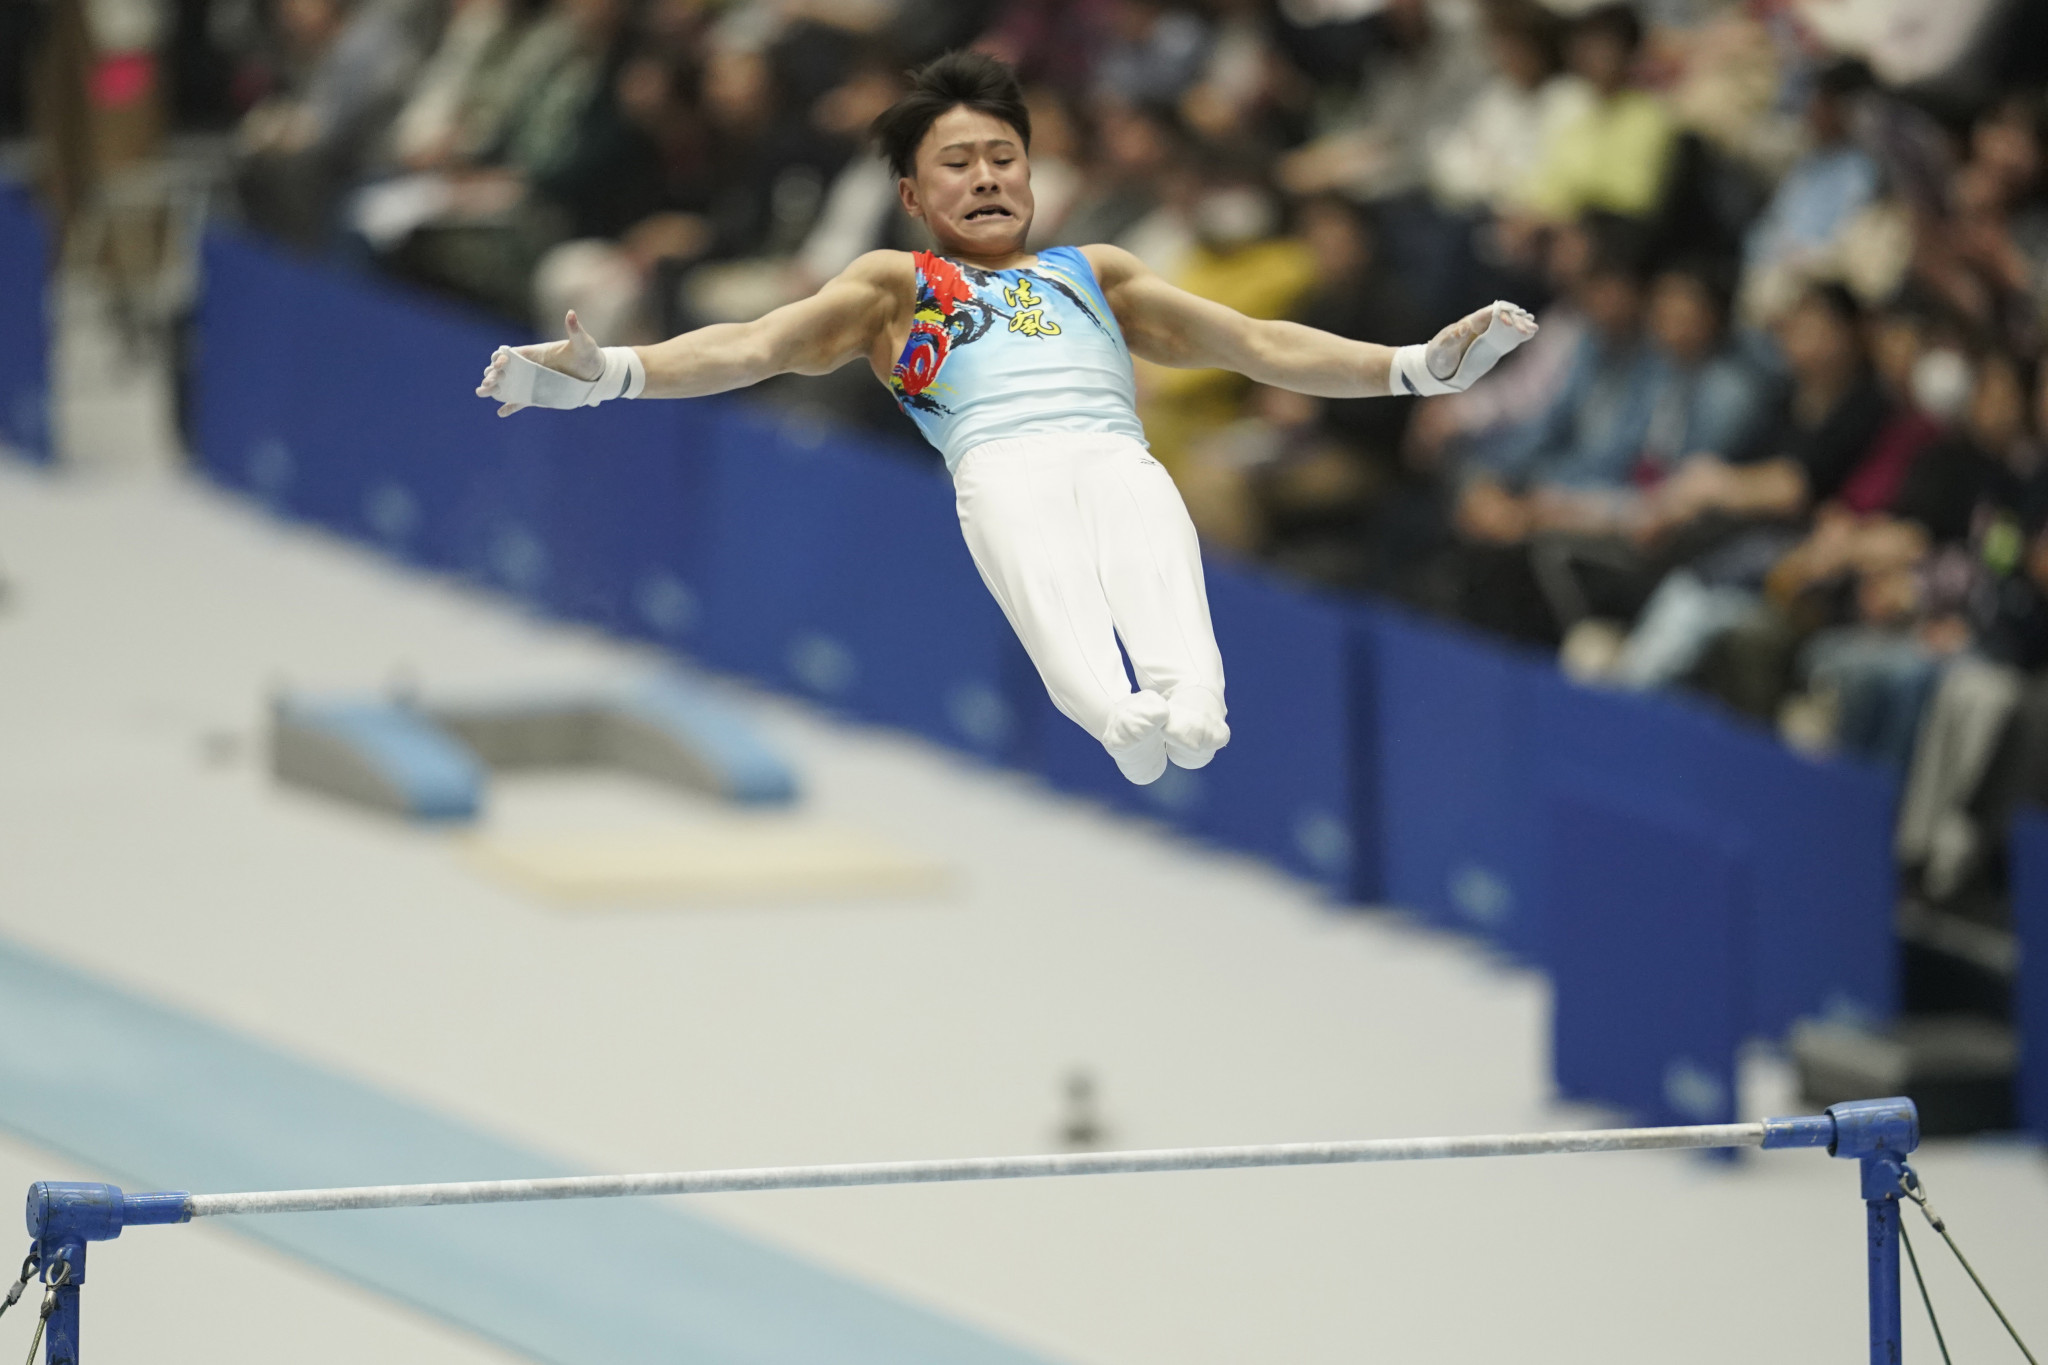 Five-time Youth Olympic gold medallist among field for debut of Artistic Gymnastics Junior World Championships